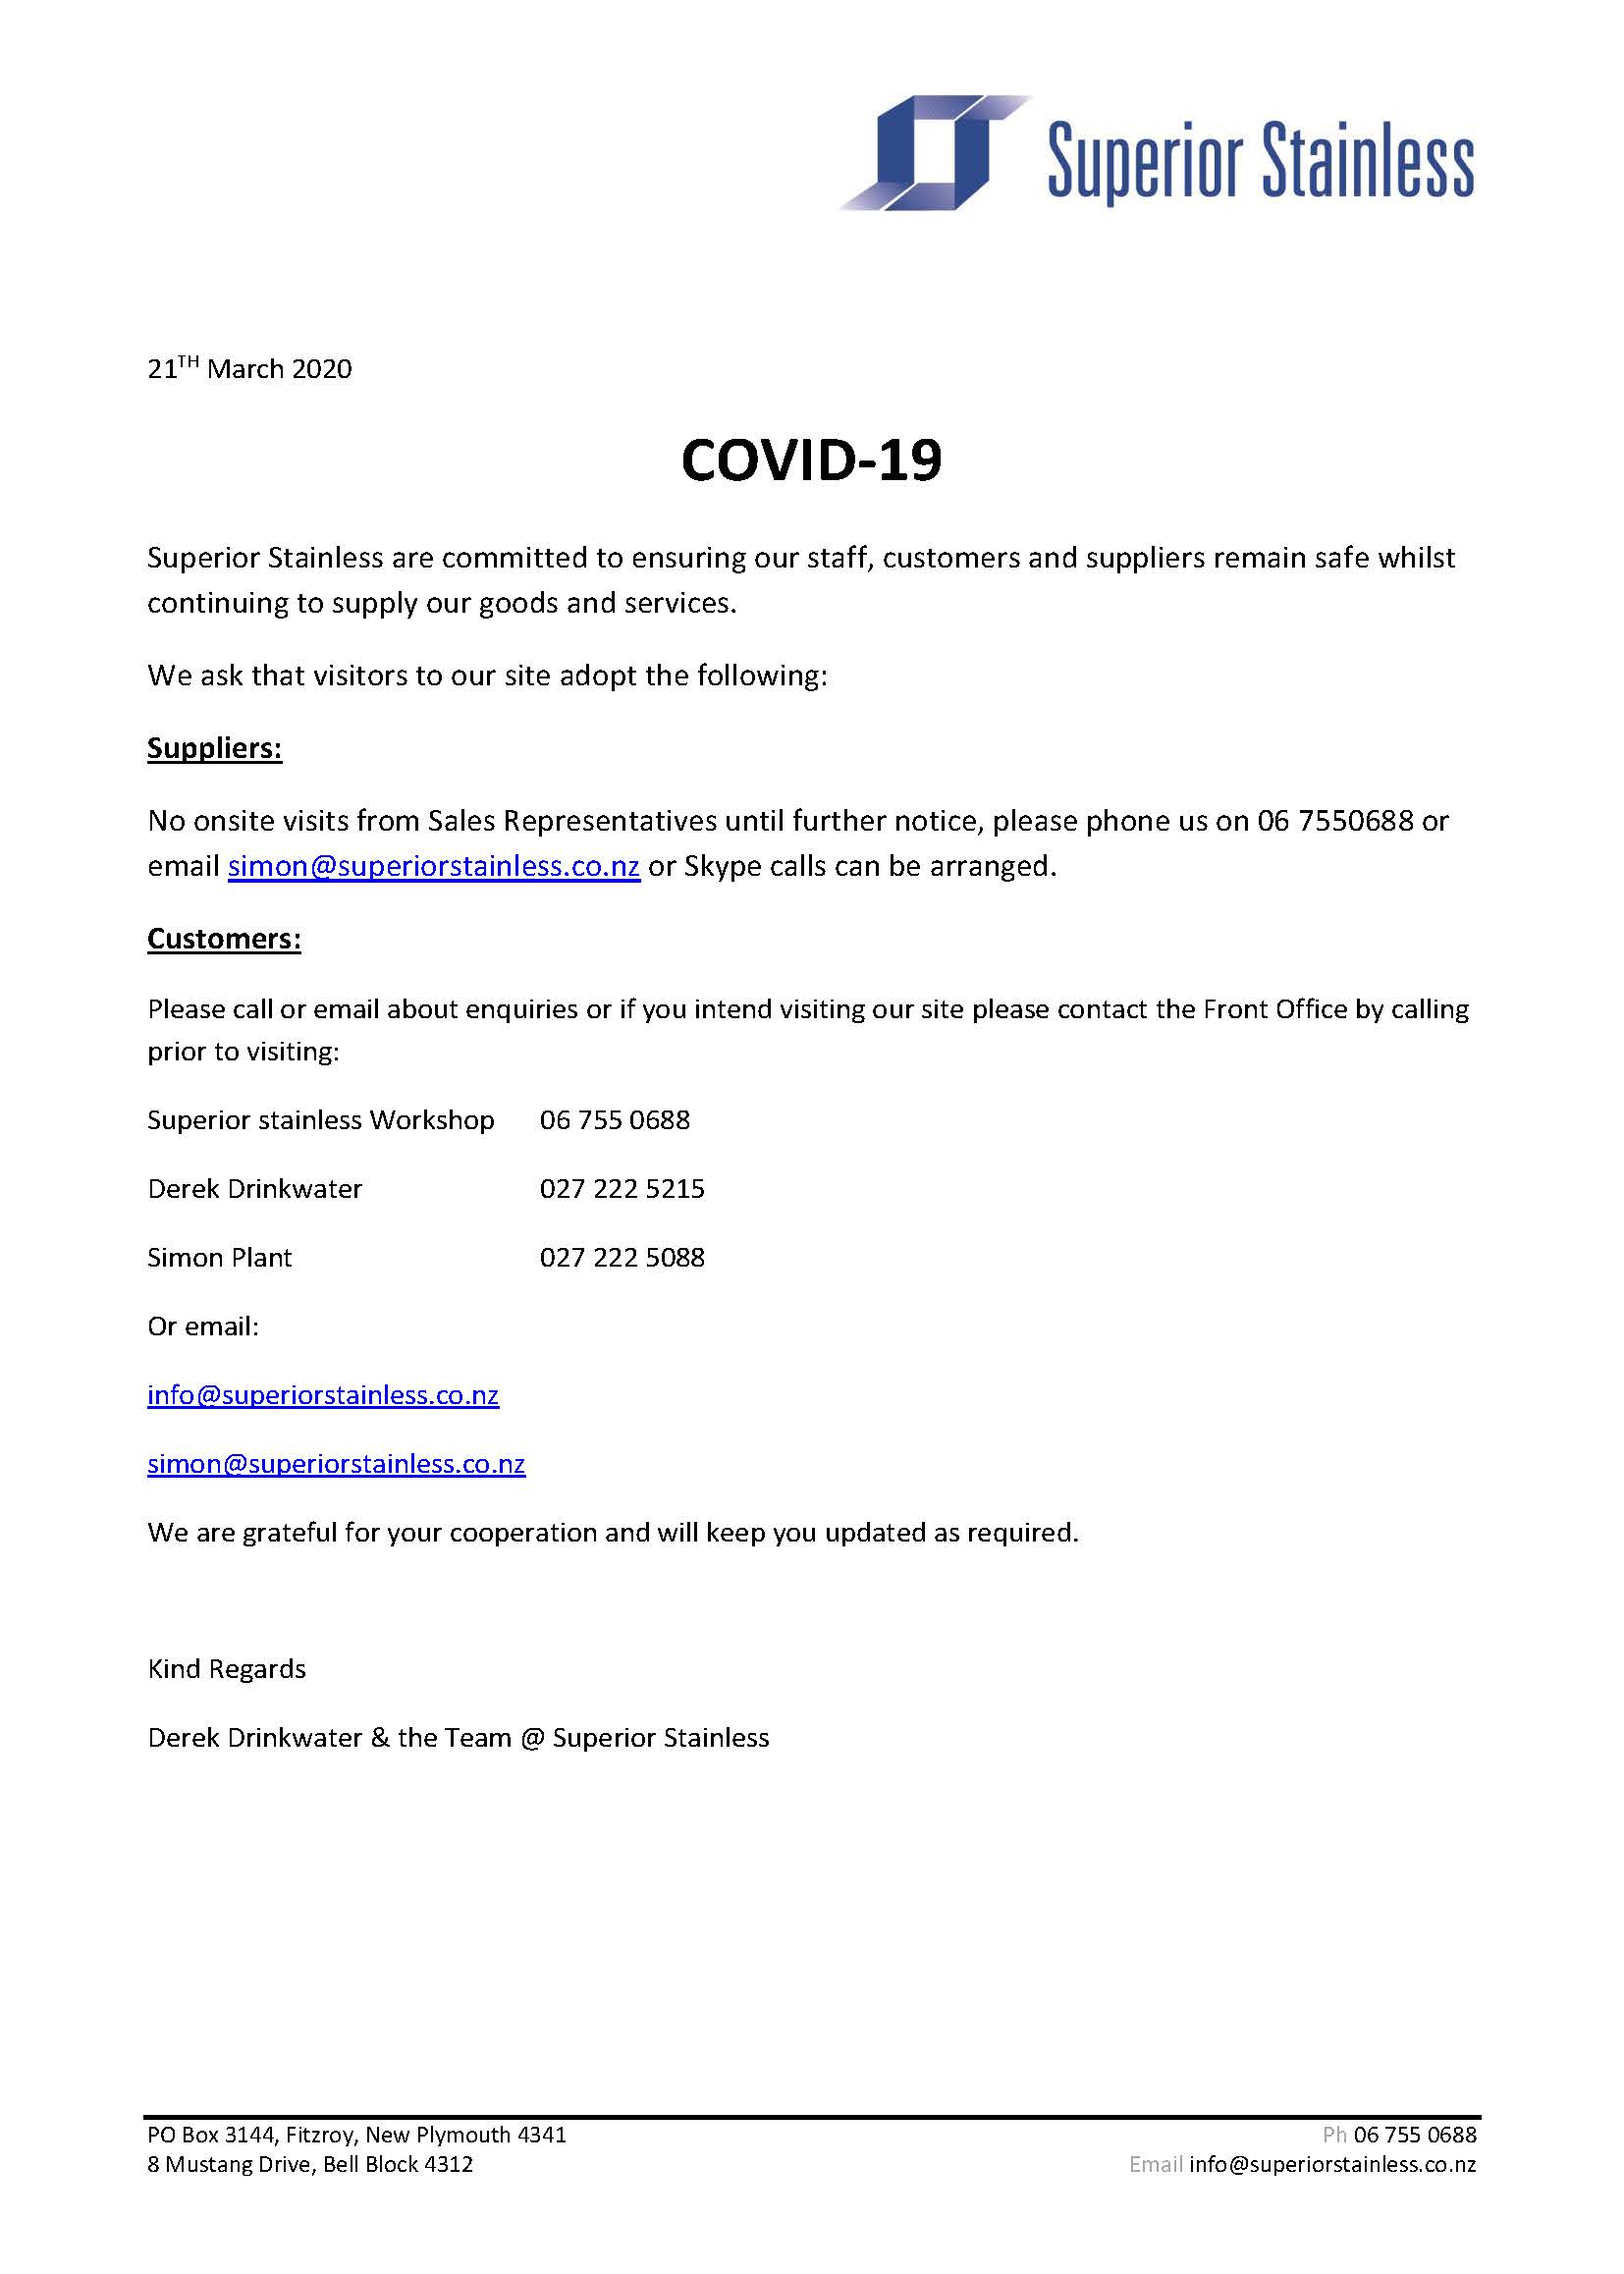 COVID19 Notice » Superior Stainless